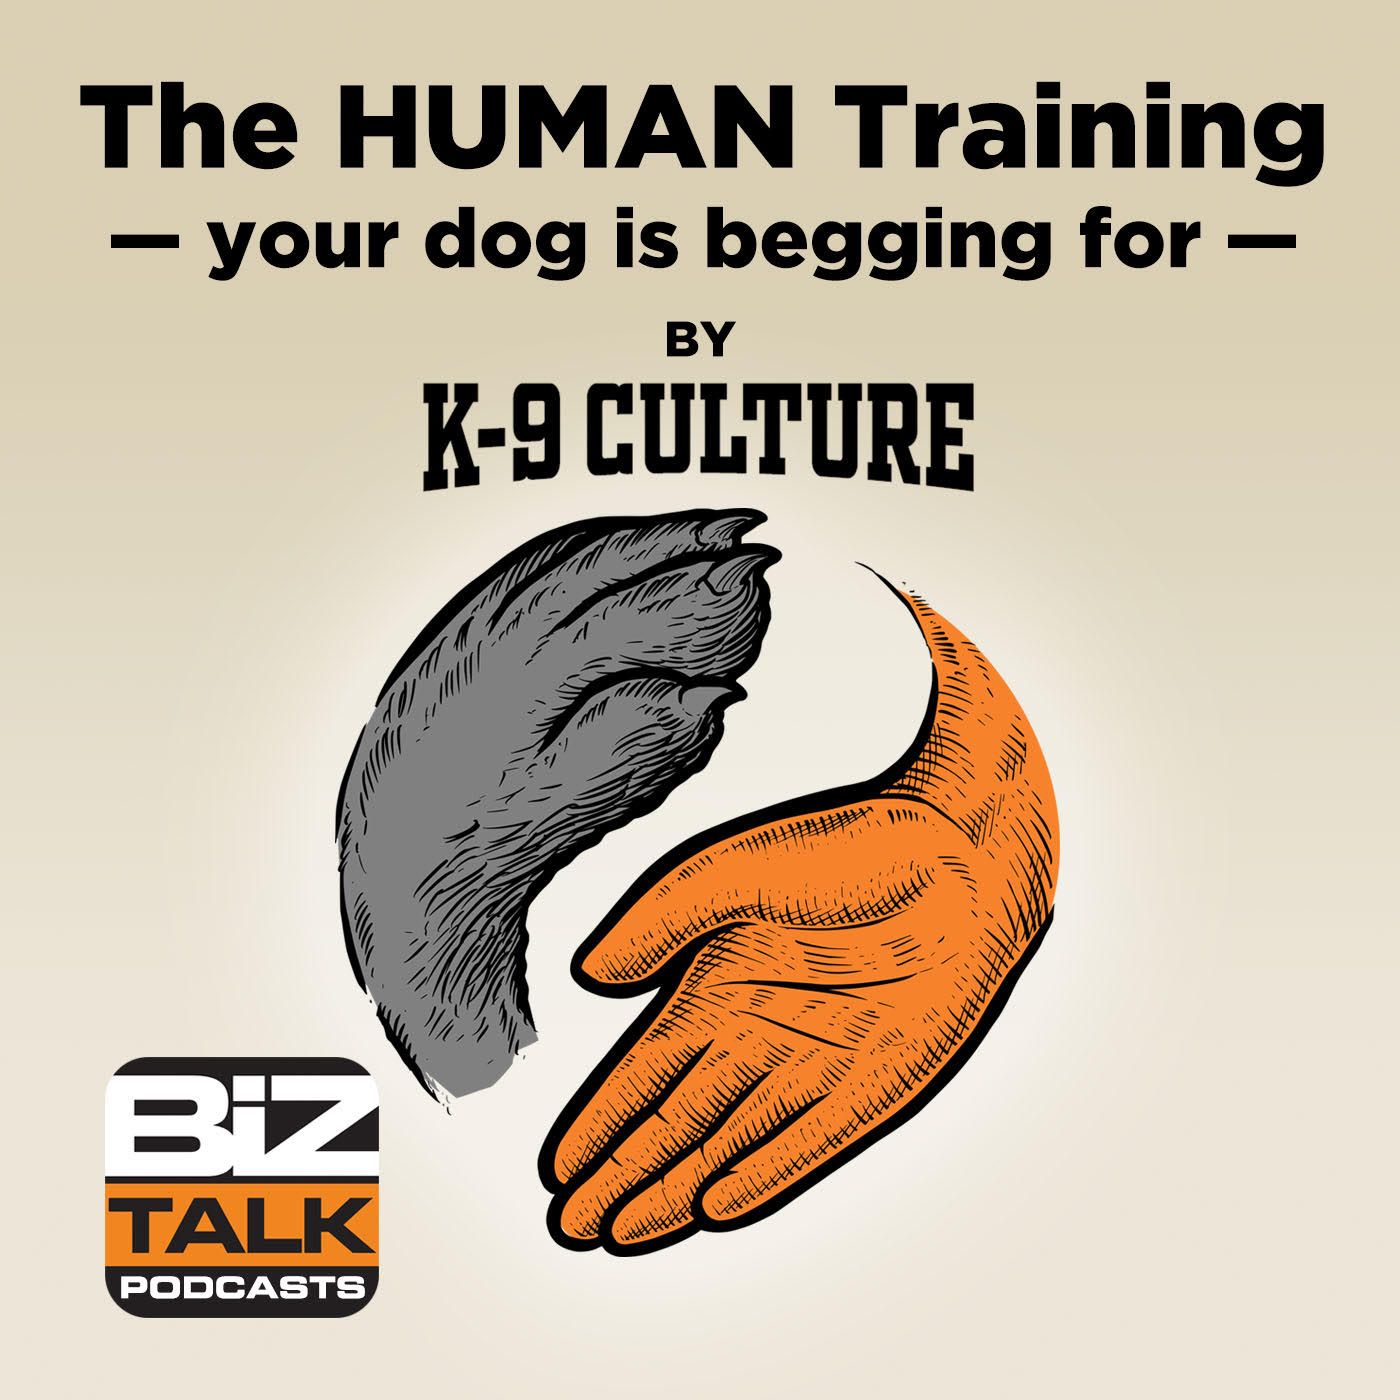 Are Dog Owners' Expectations for Training Unrealistic?